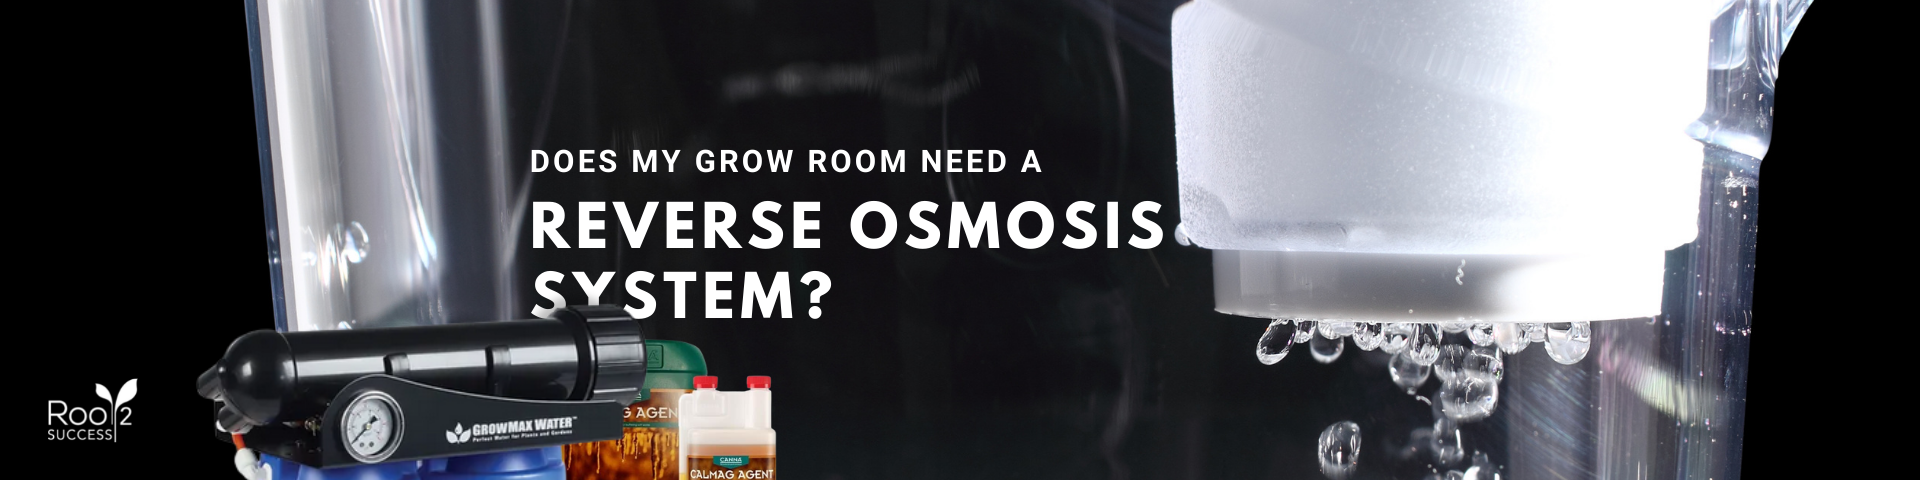 Does Your Grow Room Need a Reverse Osmosis system?